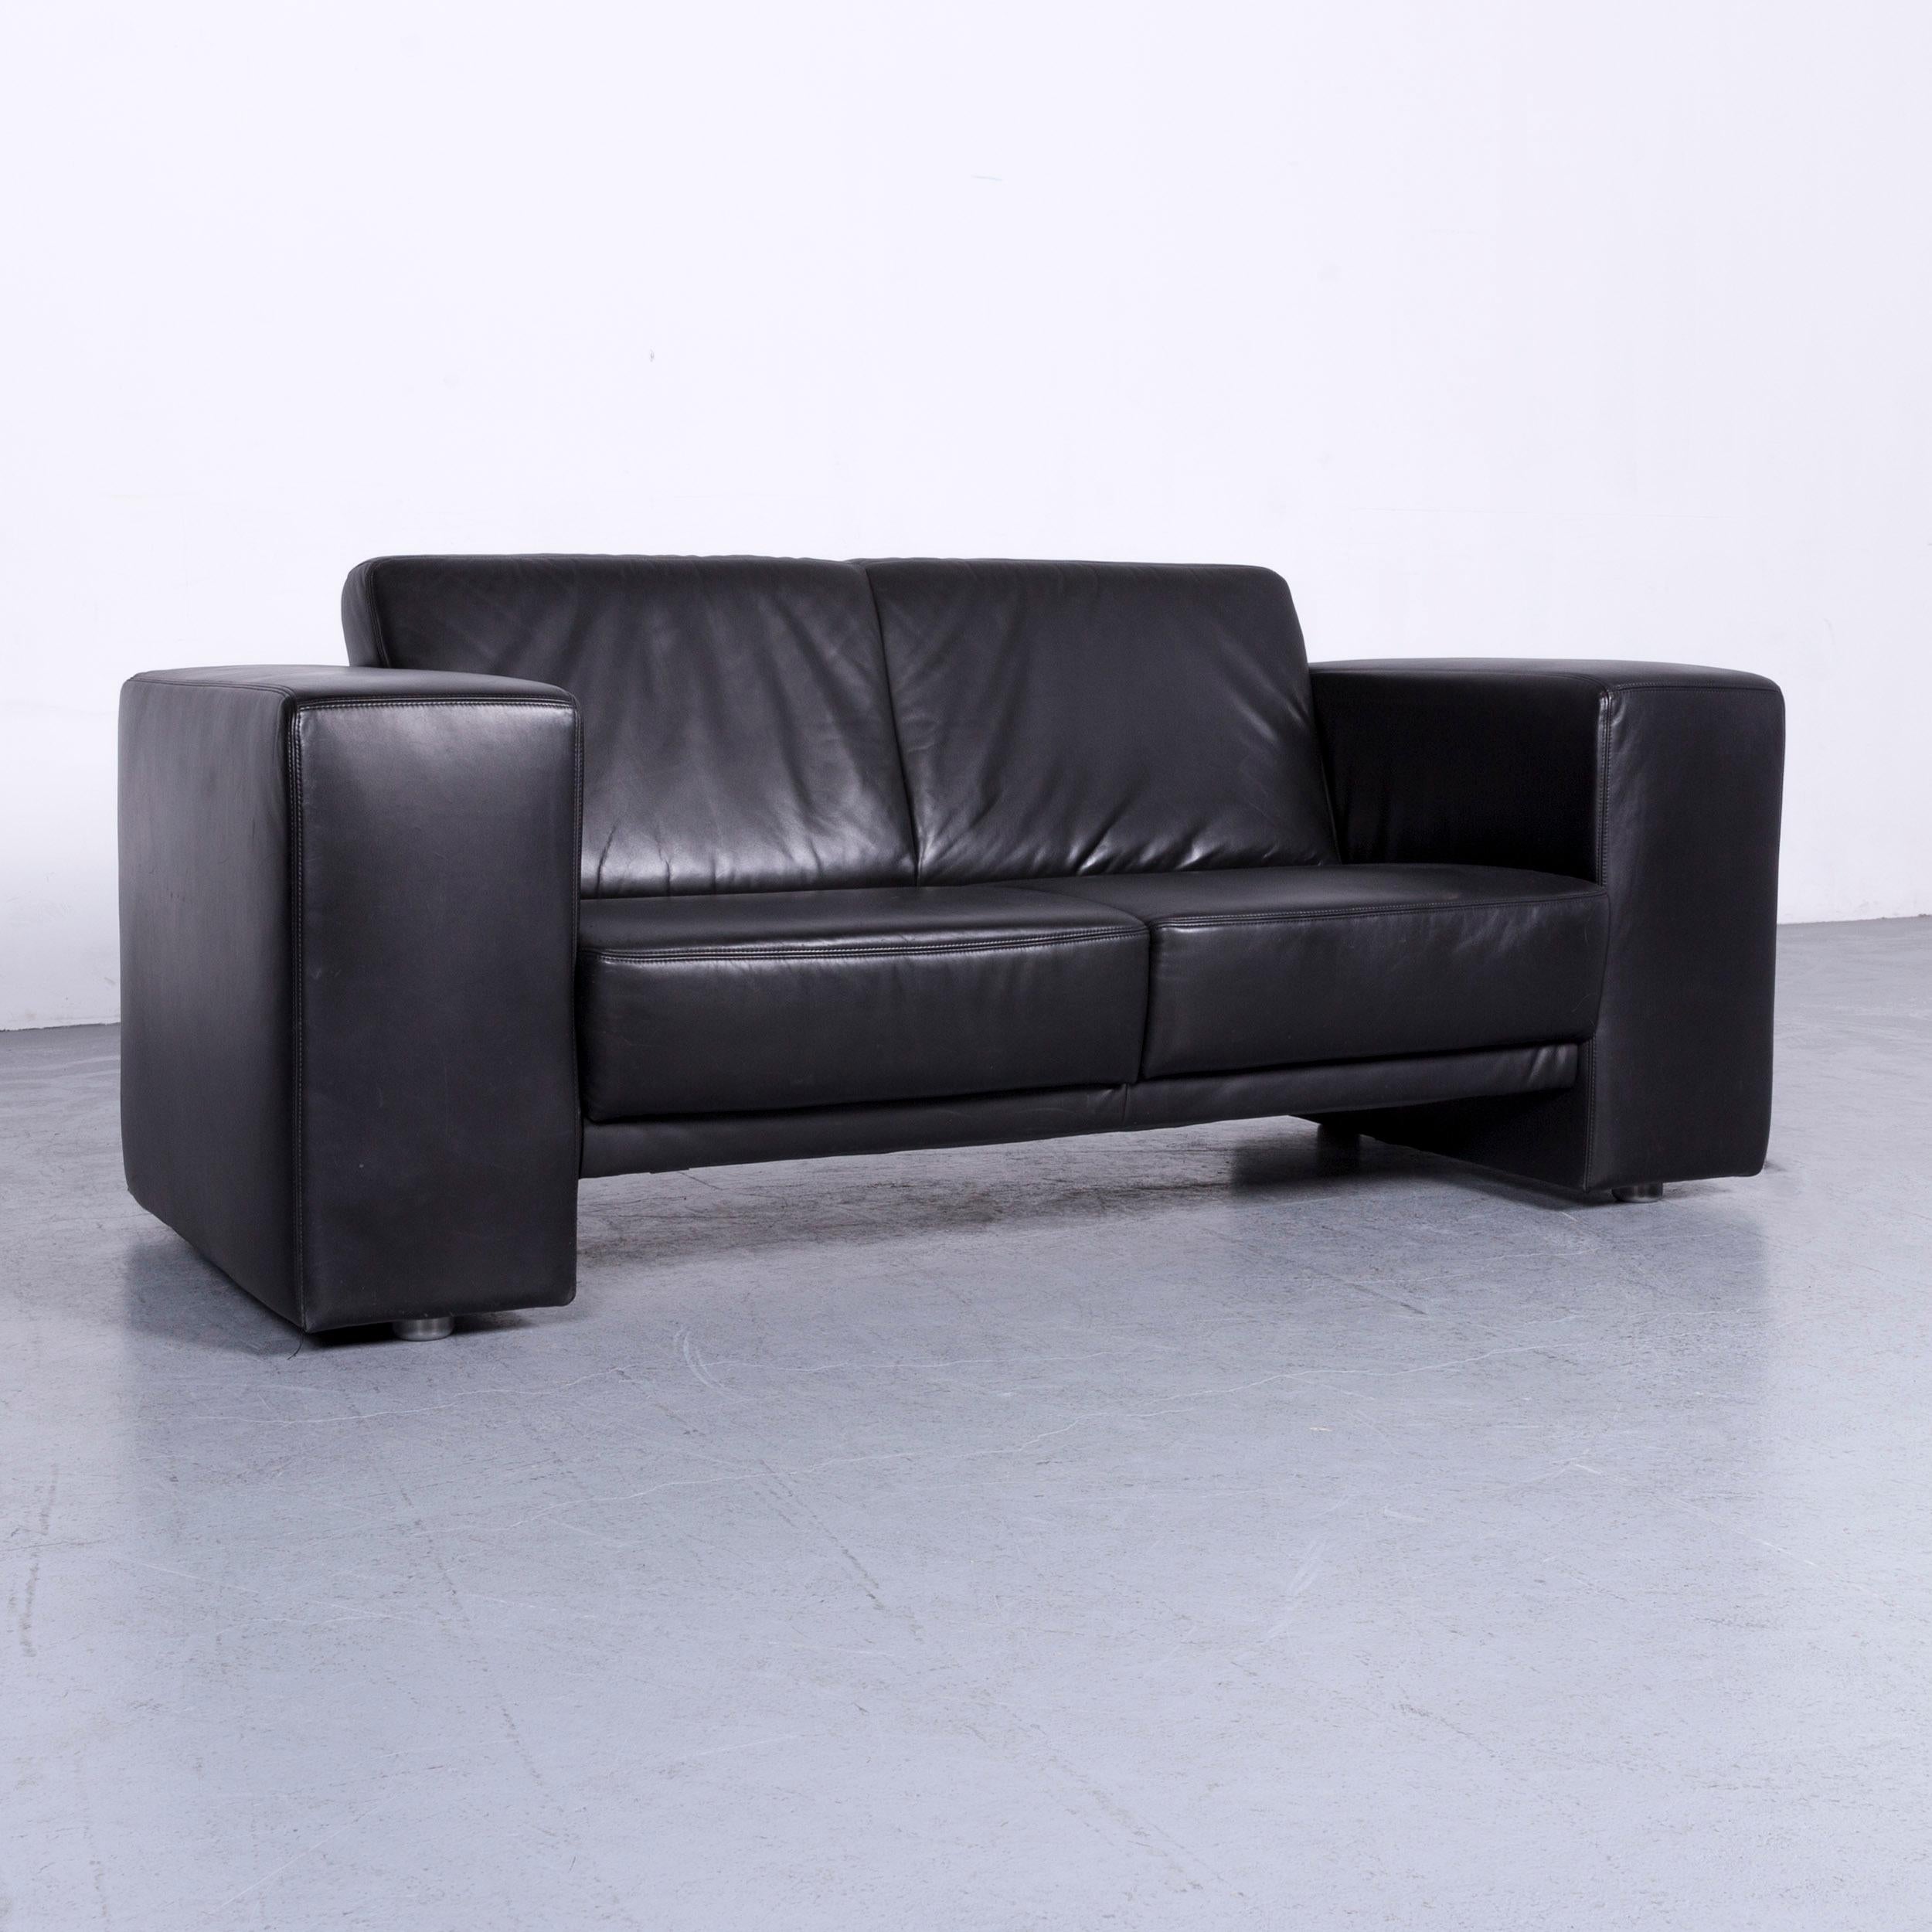 German Koinor Designer Leather Sofa Black Two-Seat Couch